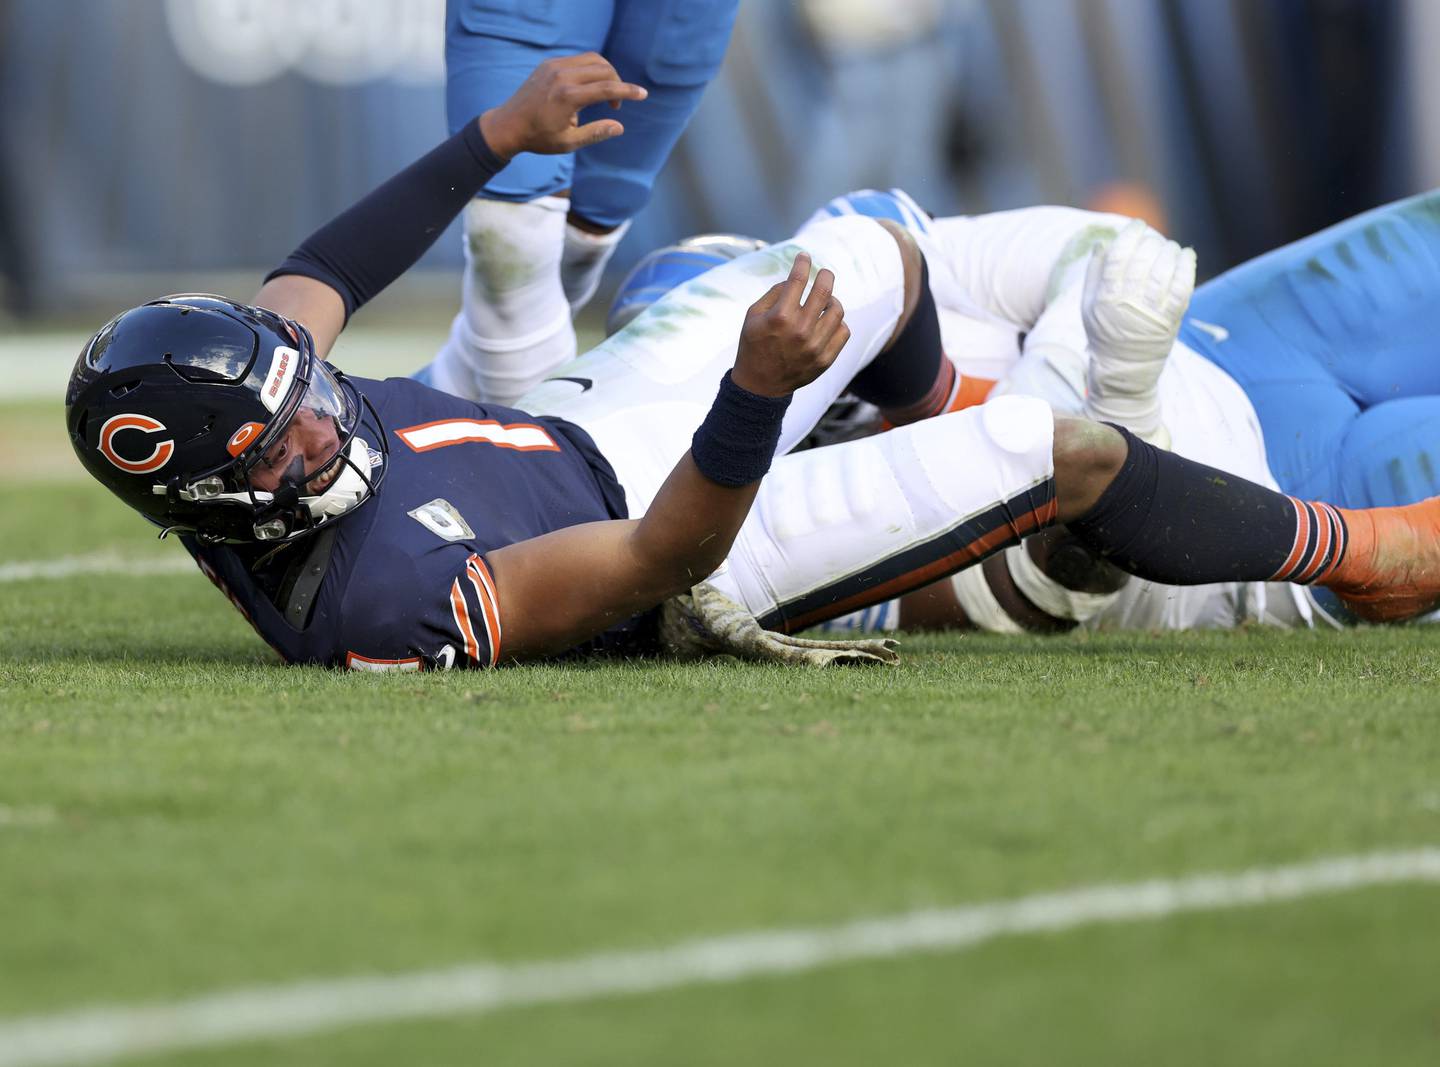 Bears quarterback Justin Fields (1) watches a pass that was intercepted and returned for a touchdown by Lions cornerback Jeff Okudah in the fourth quarter Sunday, Nov. 13, 2022, at Soldier Field.